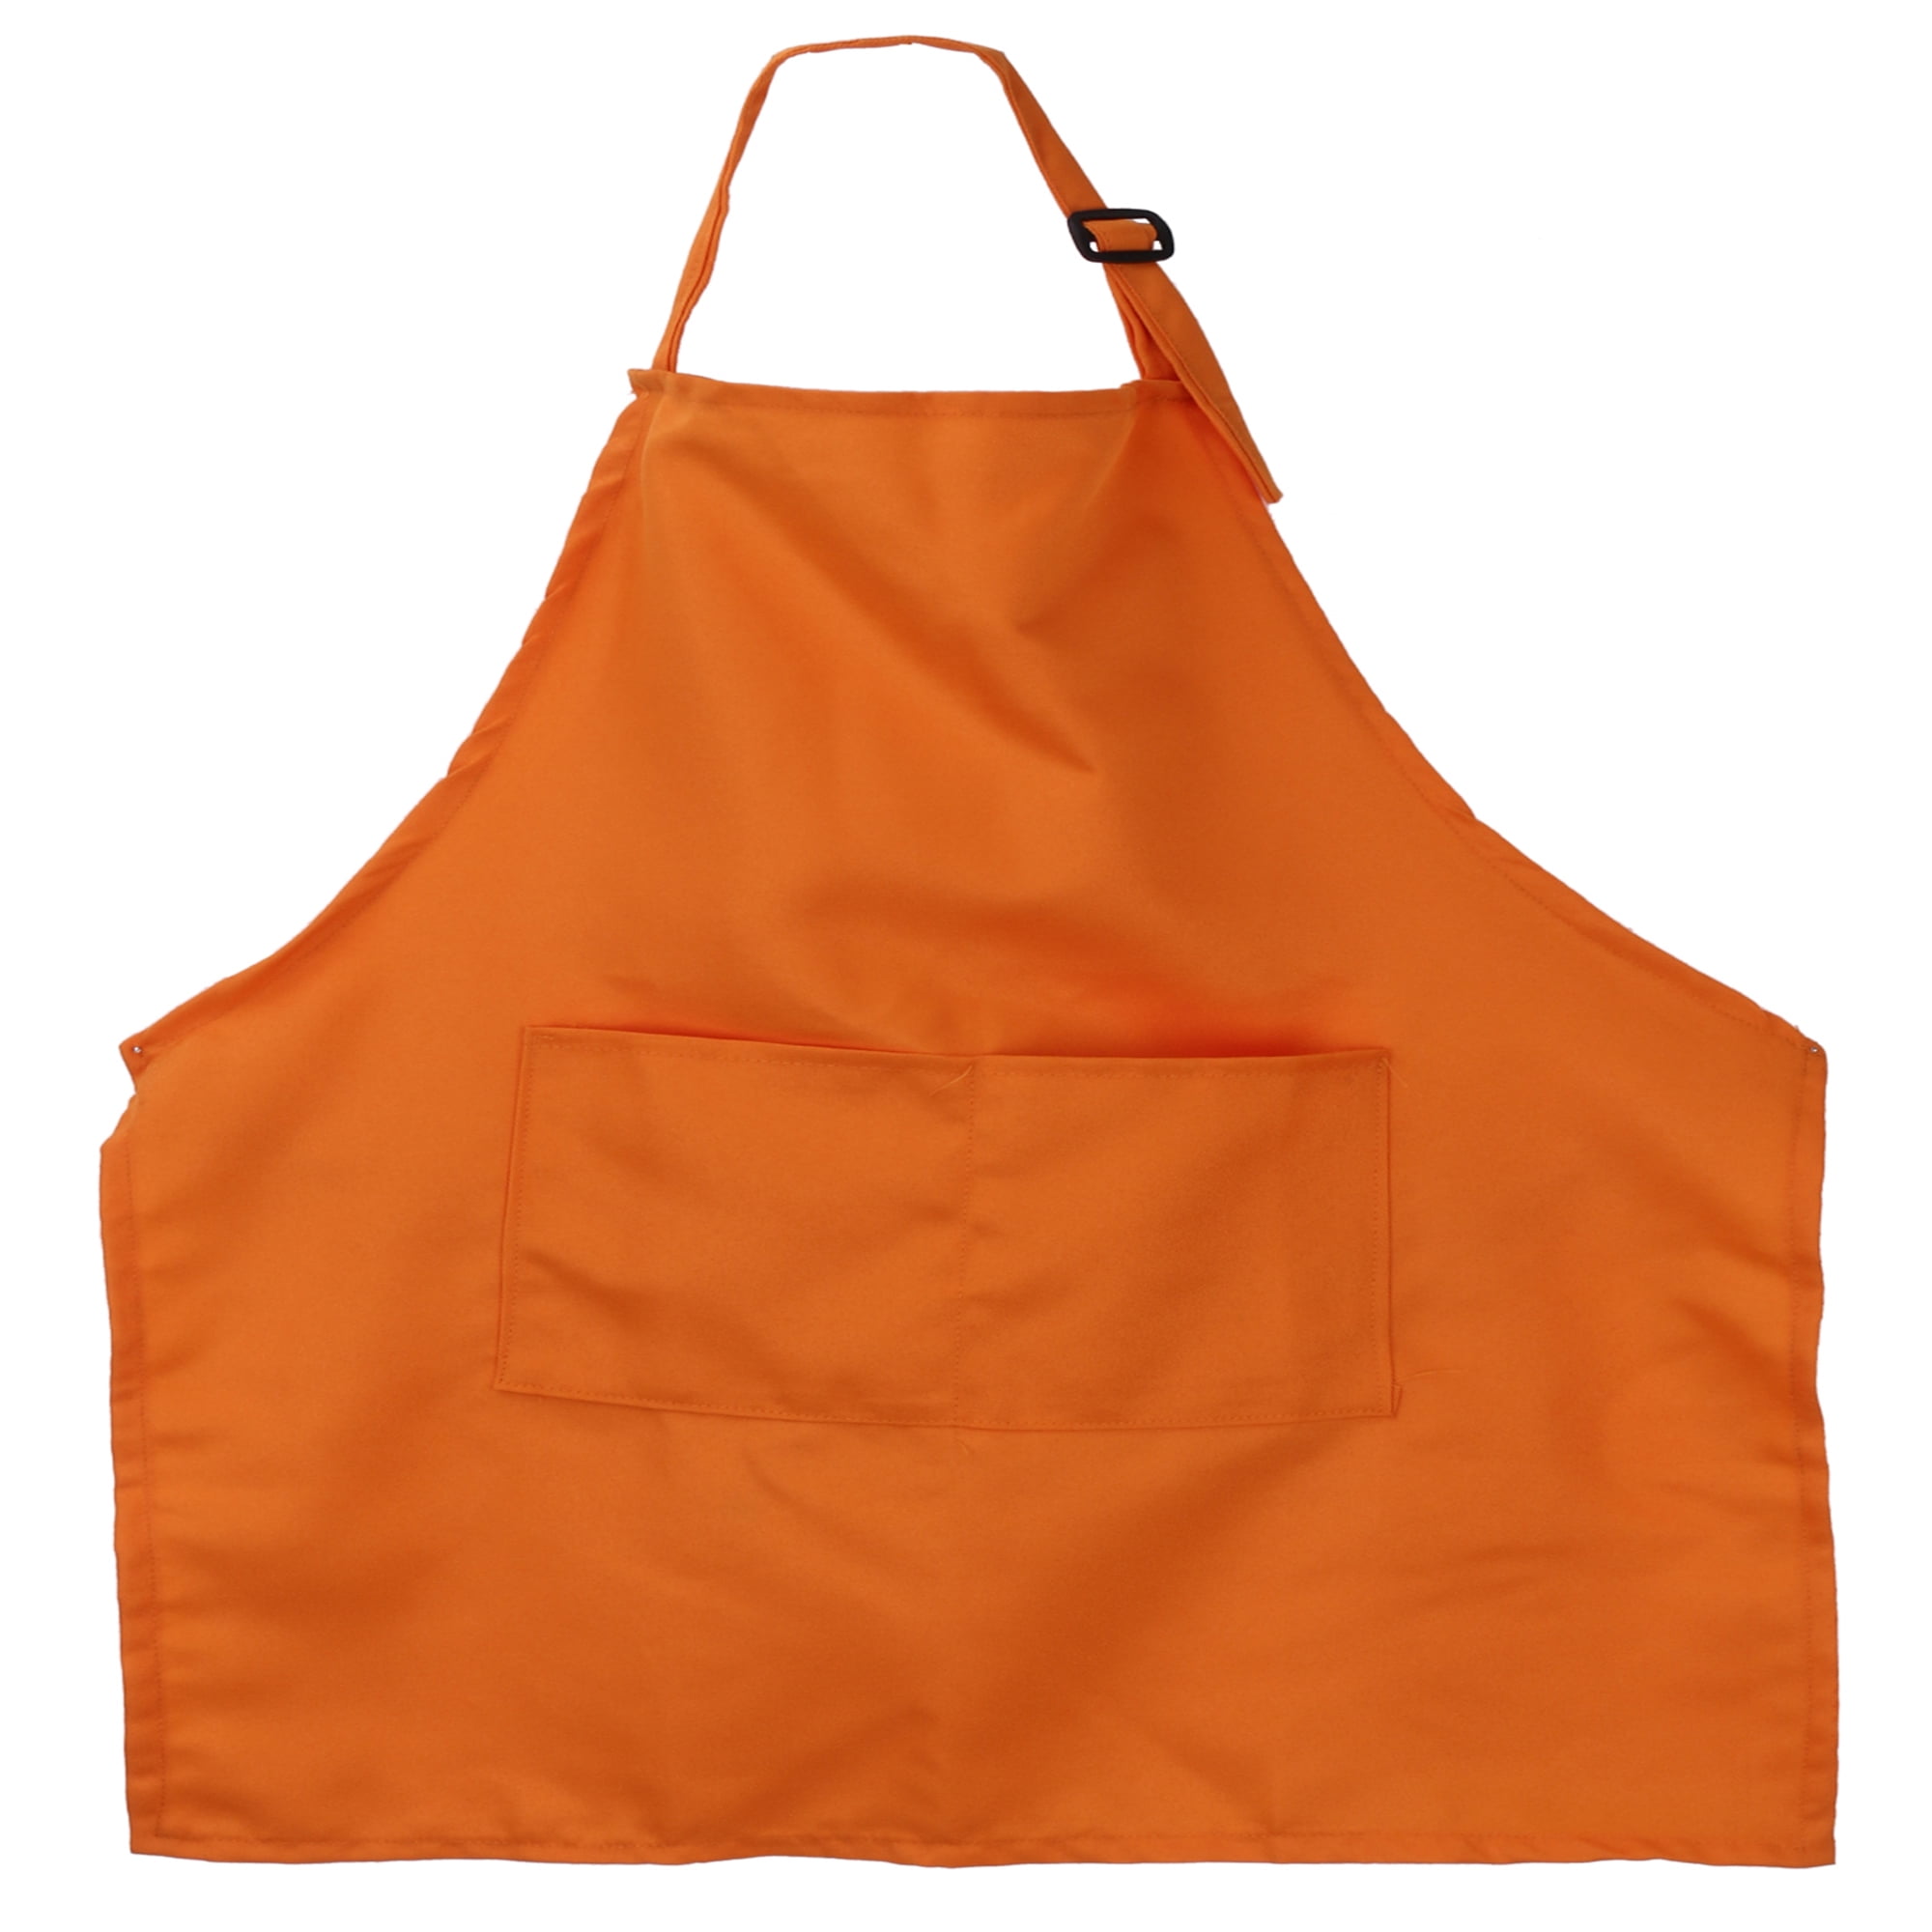 Waterproof Girls Aprons Painting Apron Kitchen Bib Aprons for Girls Boys Cooking Baking Painting Gardening Childrens Artists Aprons with Adjustable Neck Strap XunHe 10 Pieces Kids Aprons